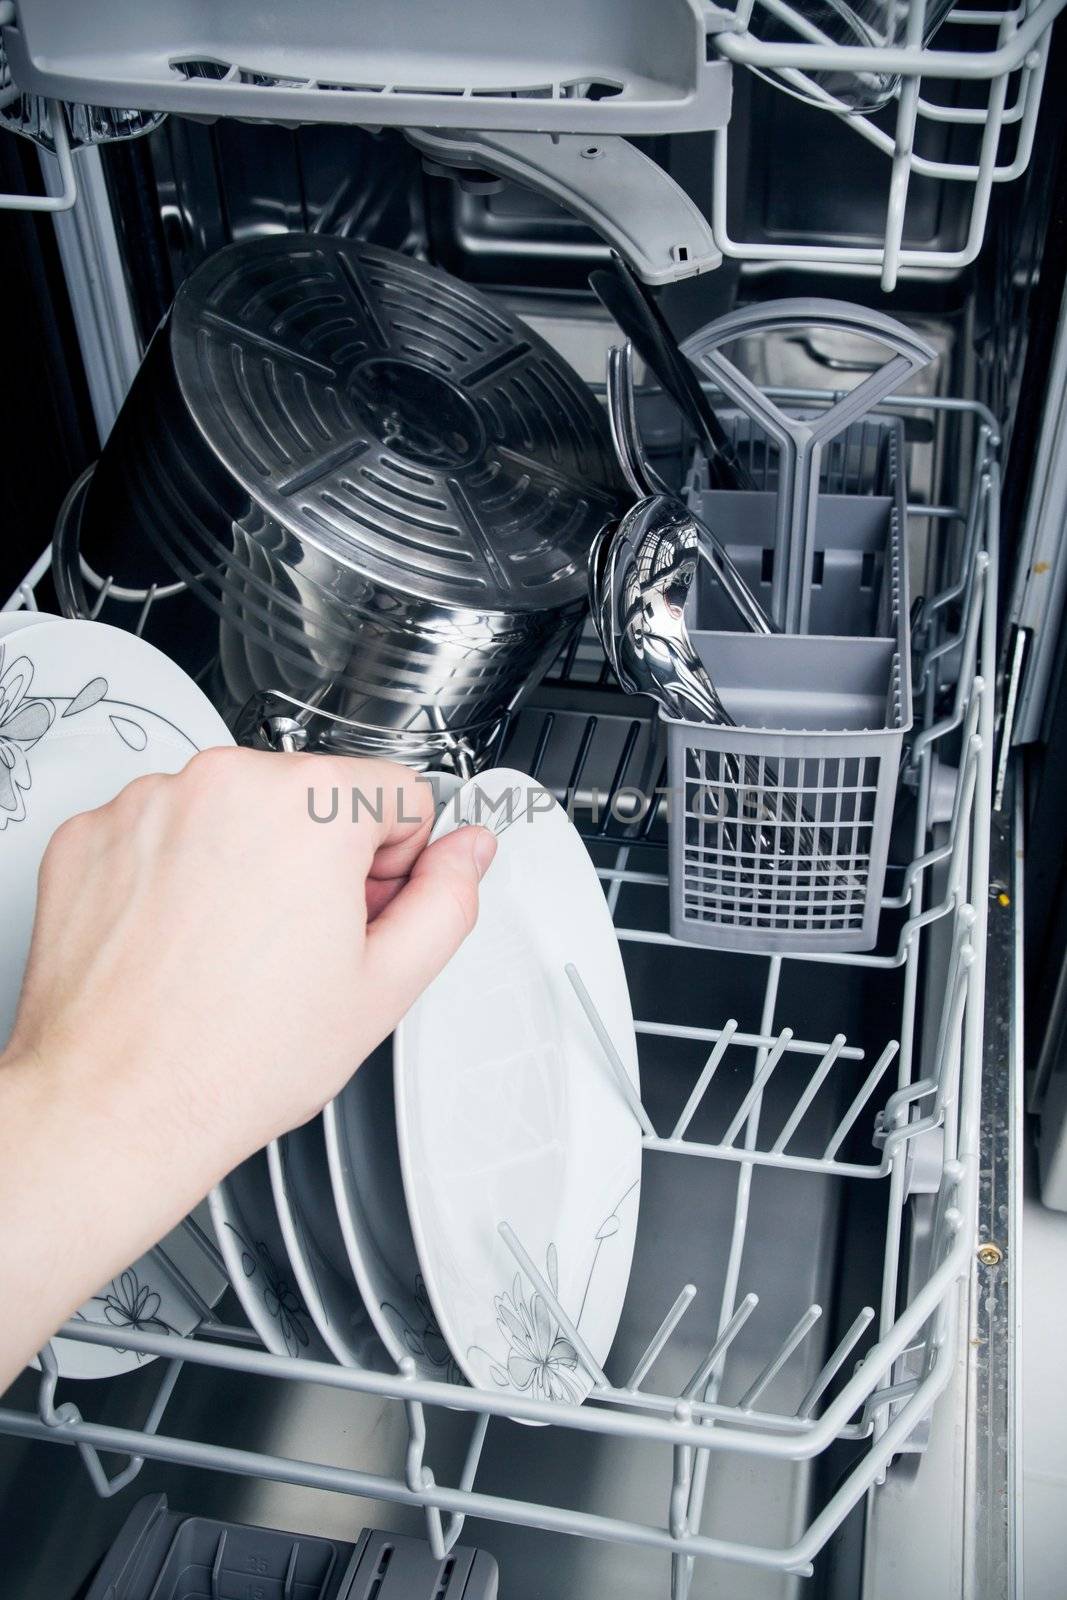 Hand takes plate from dishwasher by simpson33